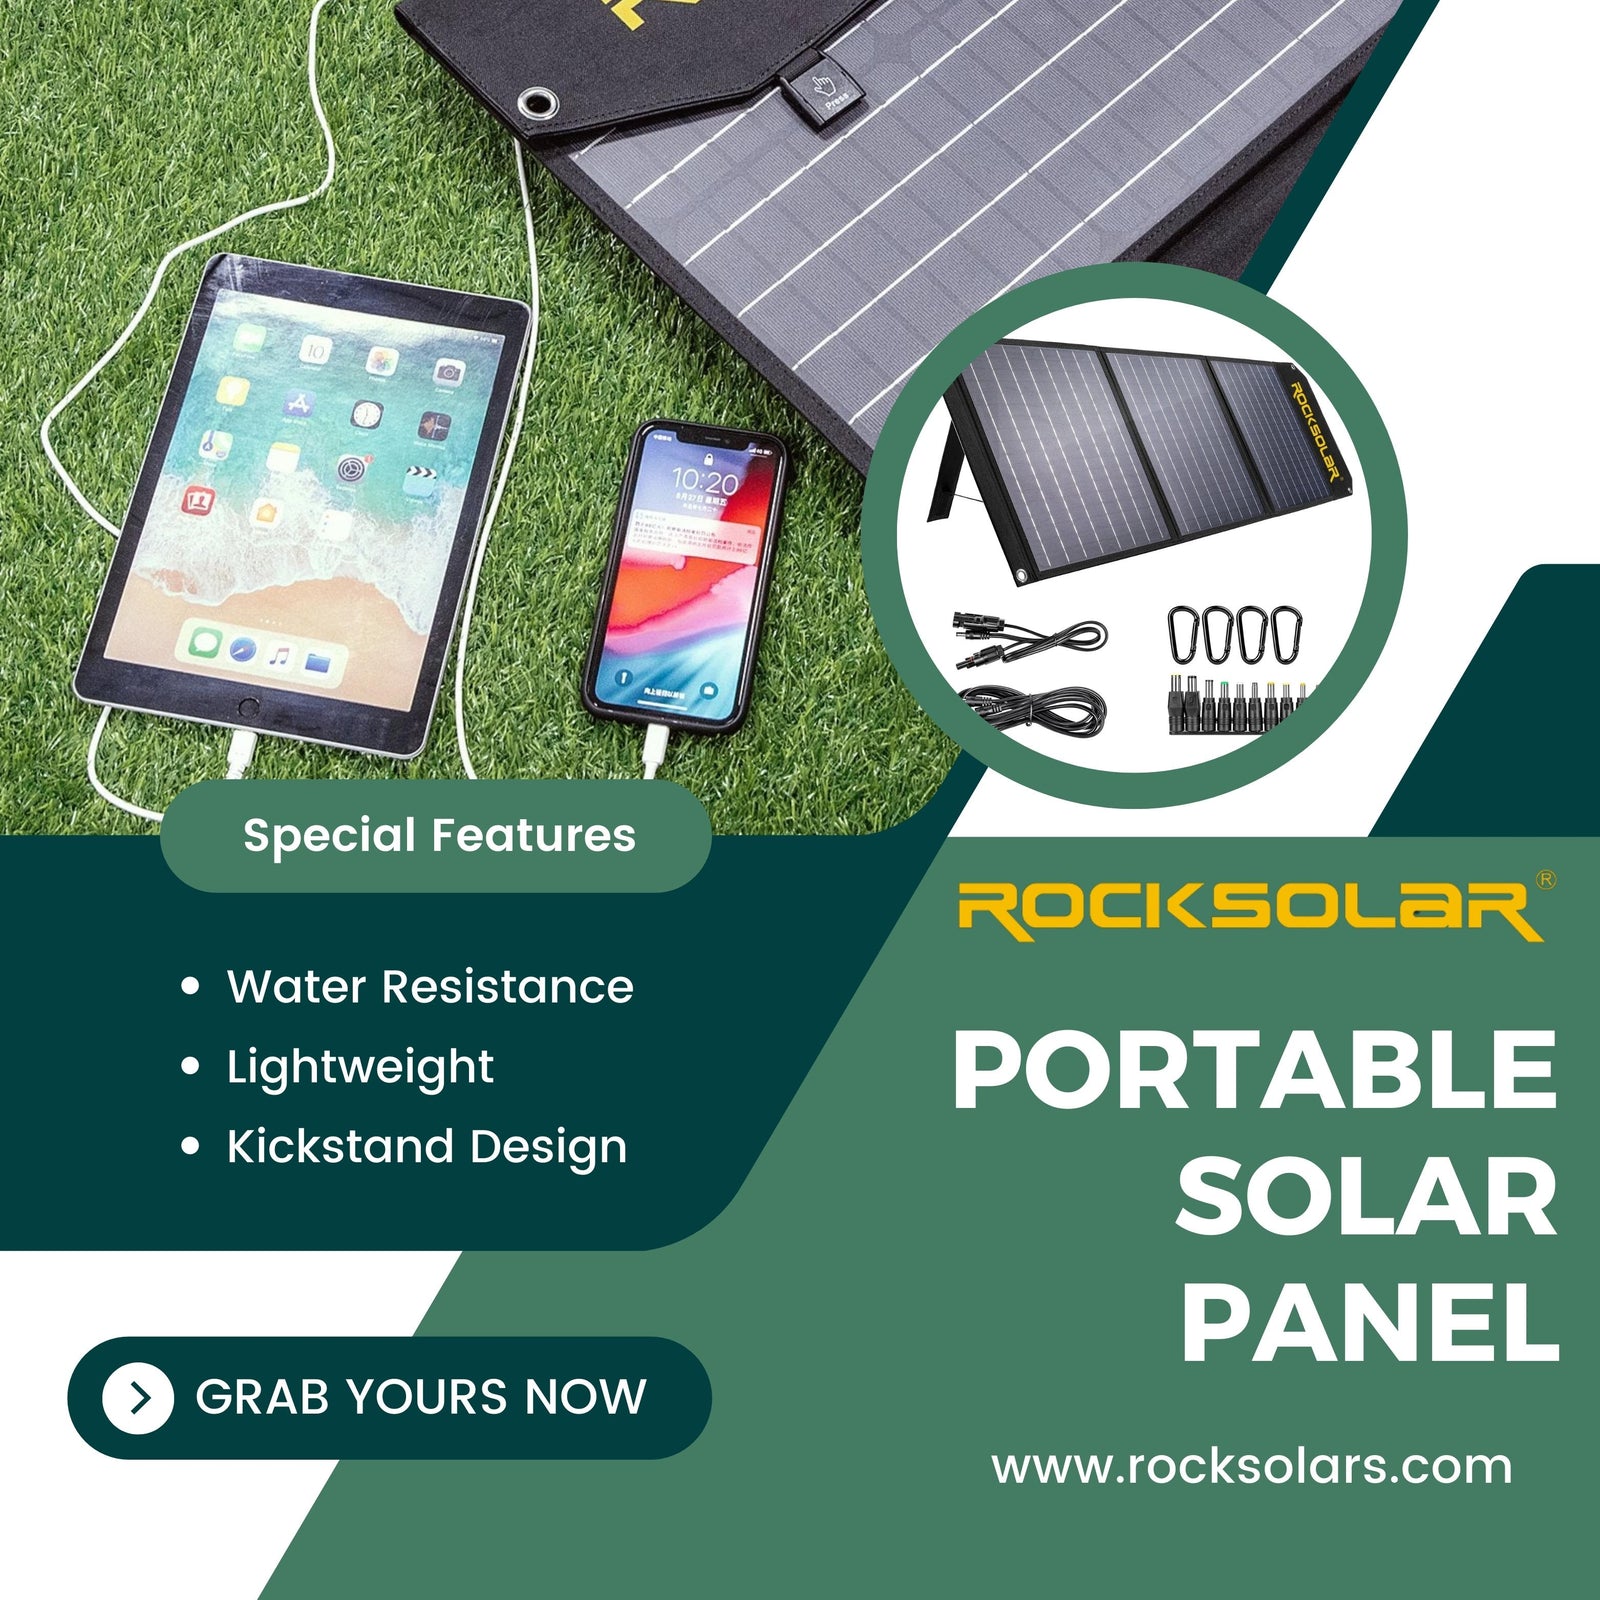 Portable Solar Panels: What Are They & How Do They Work?